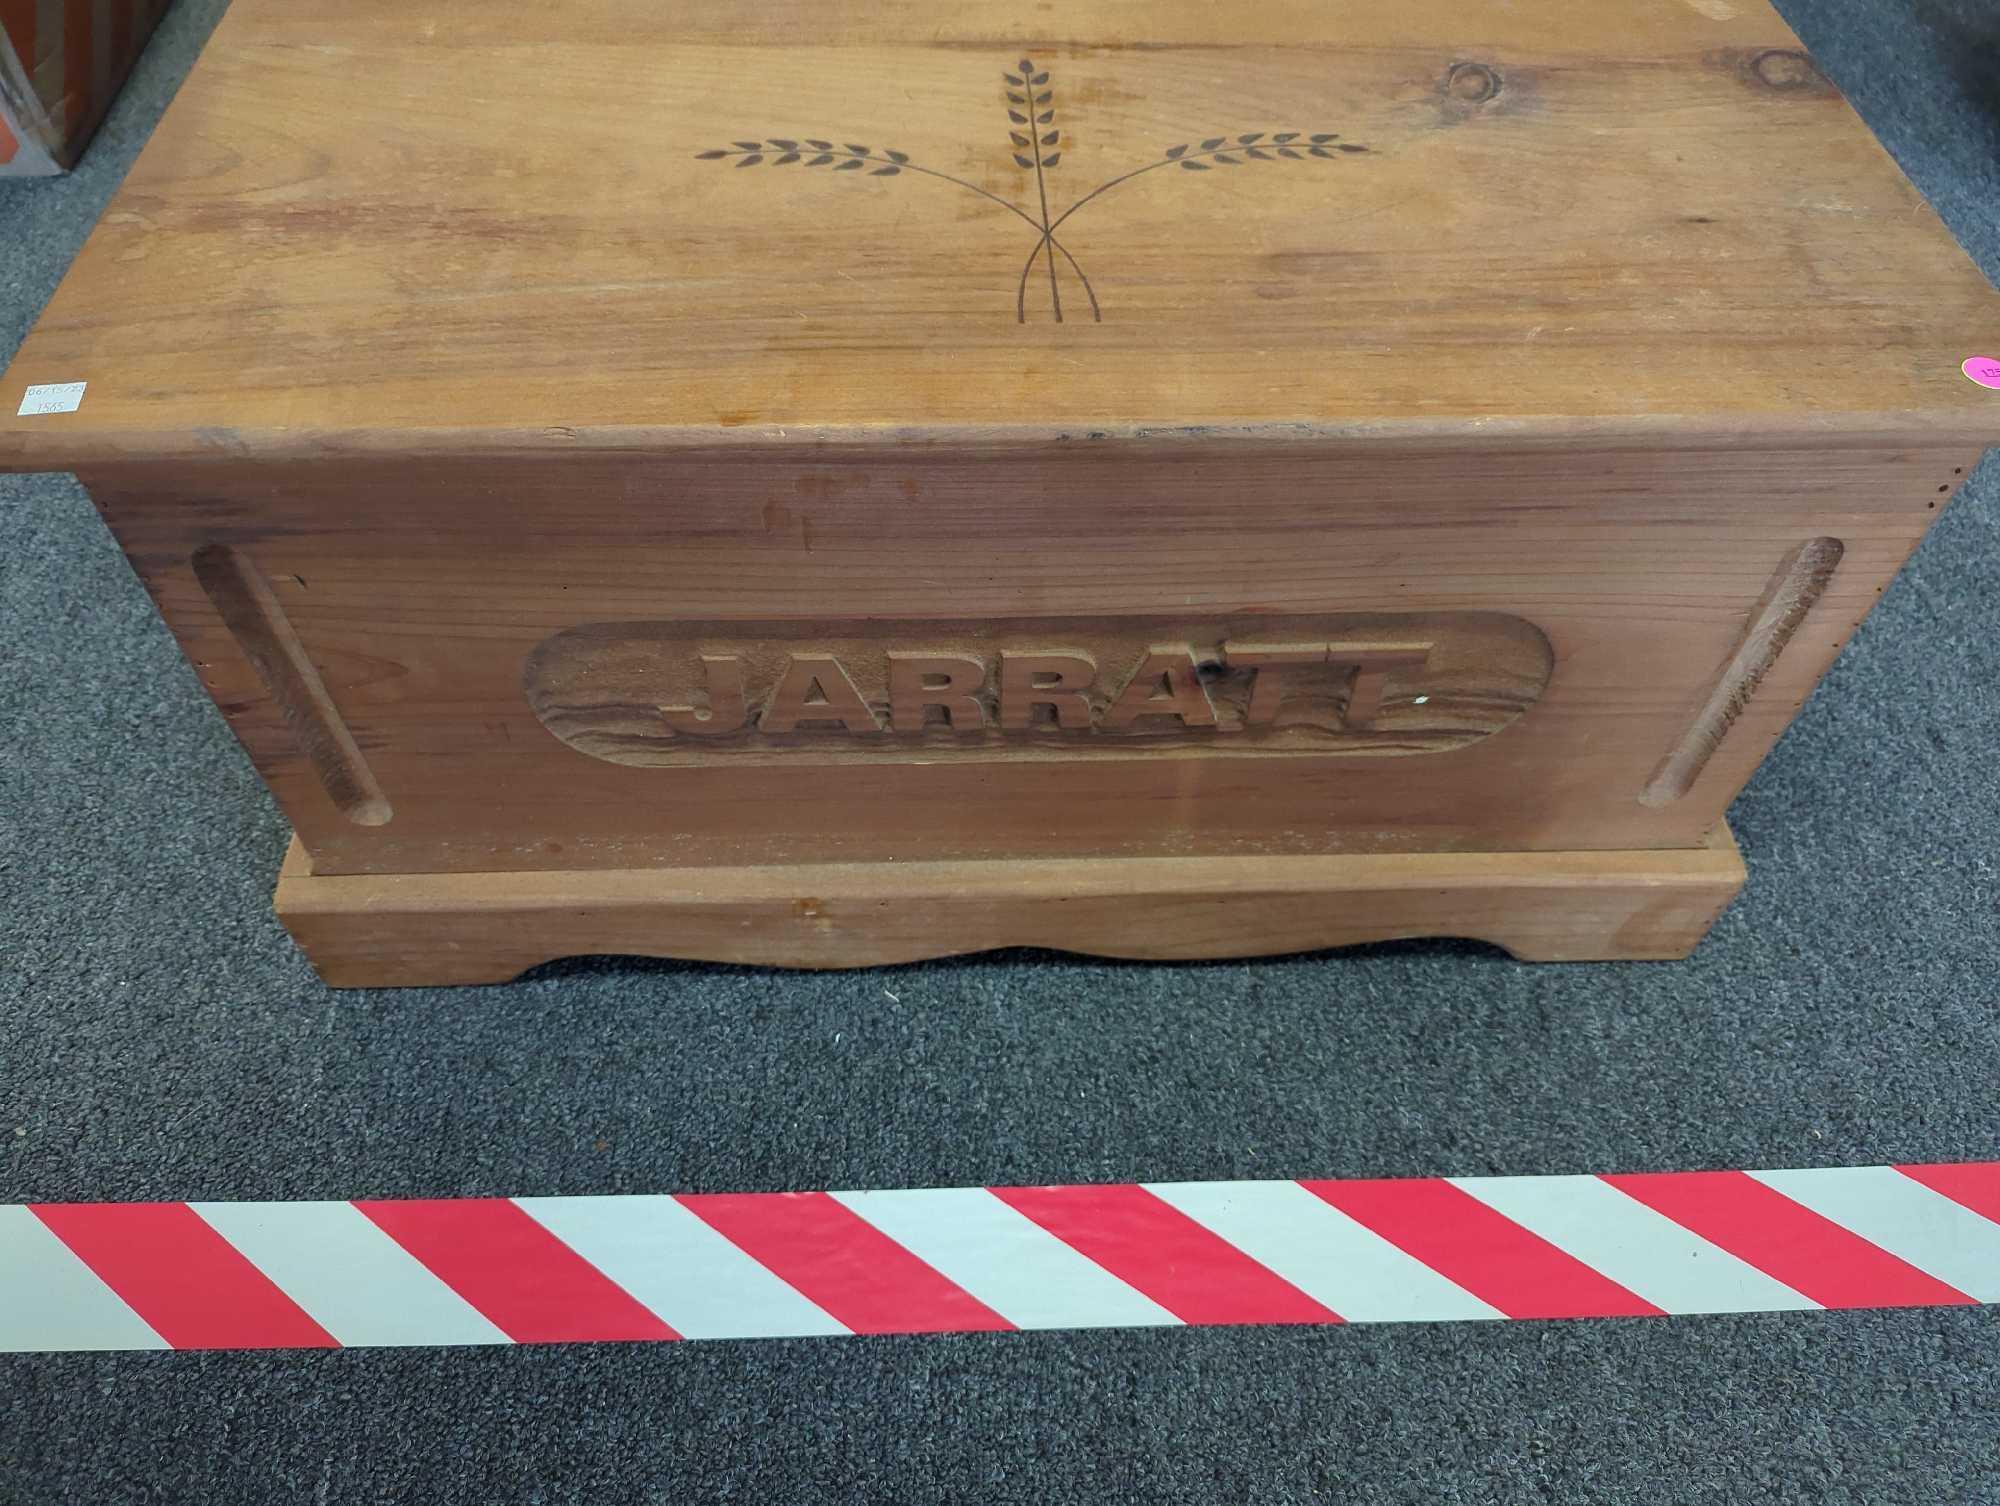 Kids Wooden Toy Chest With The Name Jarratt Carved into The Front Measure Approximately 30.5 in x 15